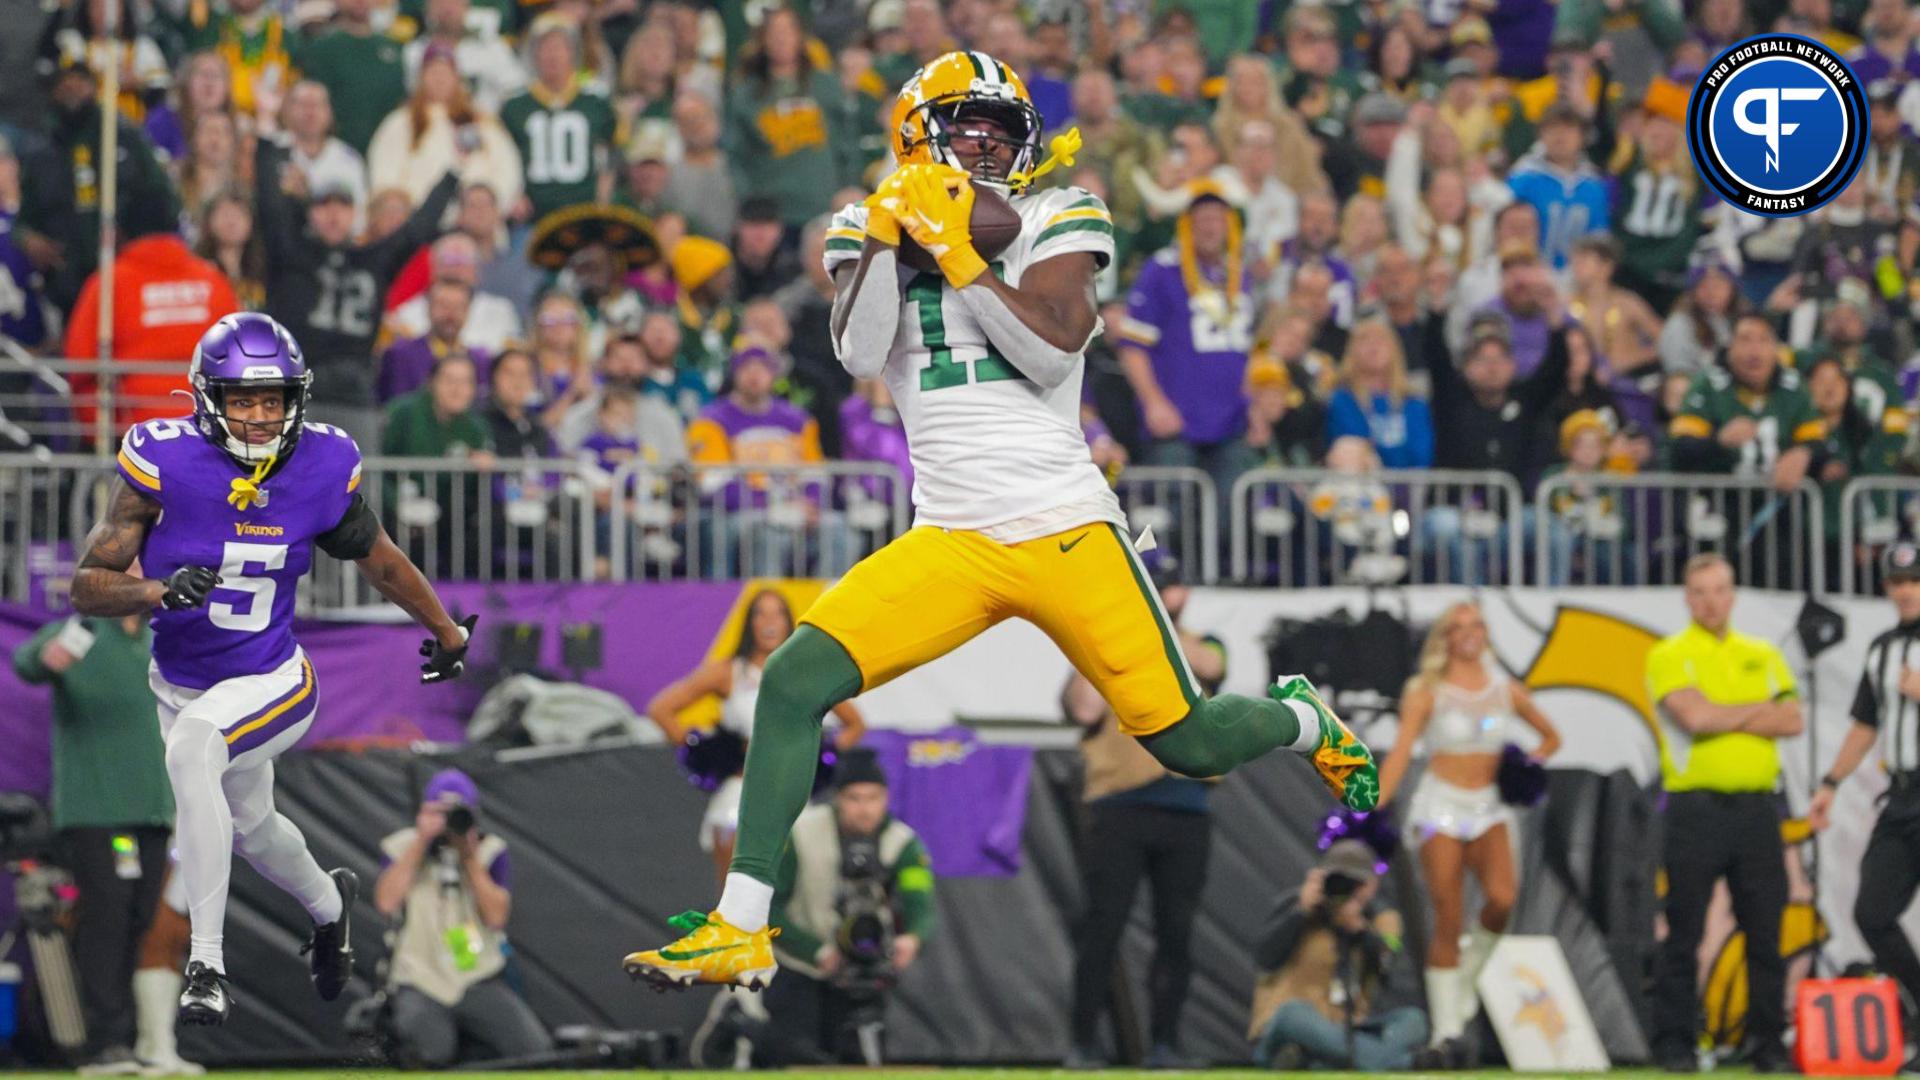 Green Bay Packers wide receiver Jayden Reed (11) catches a pass for a touchdown against the Minnesota Vikings in the first quarter at U.S. Bank Stadium.